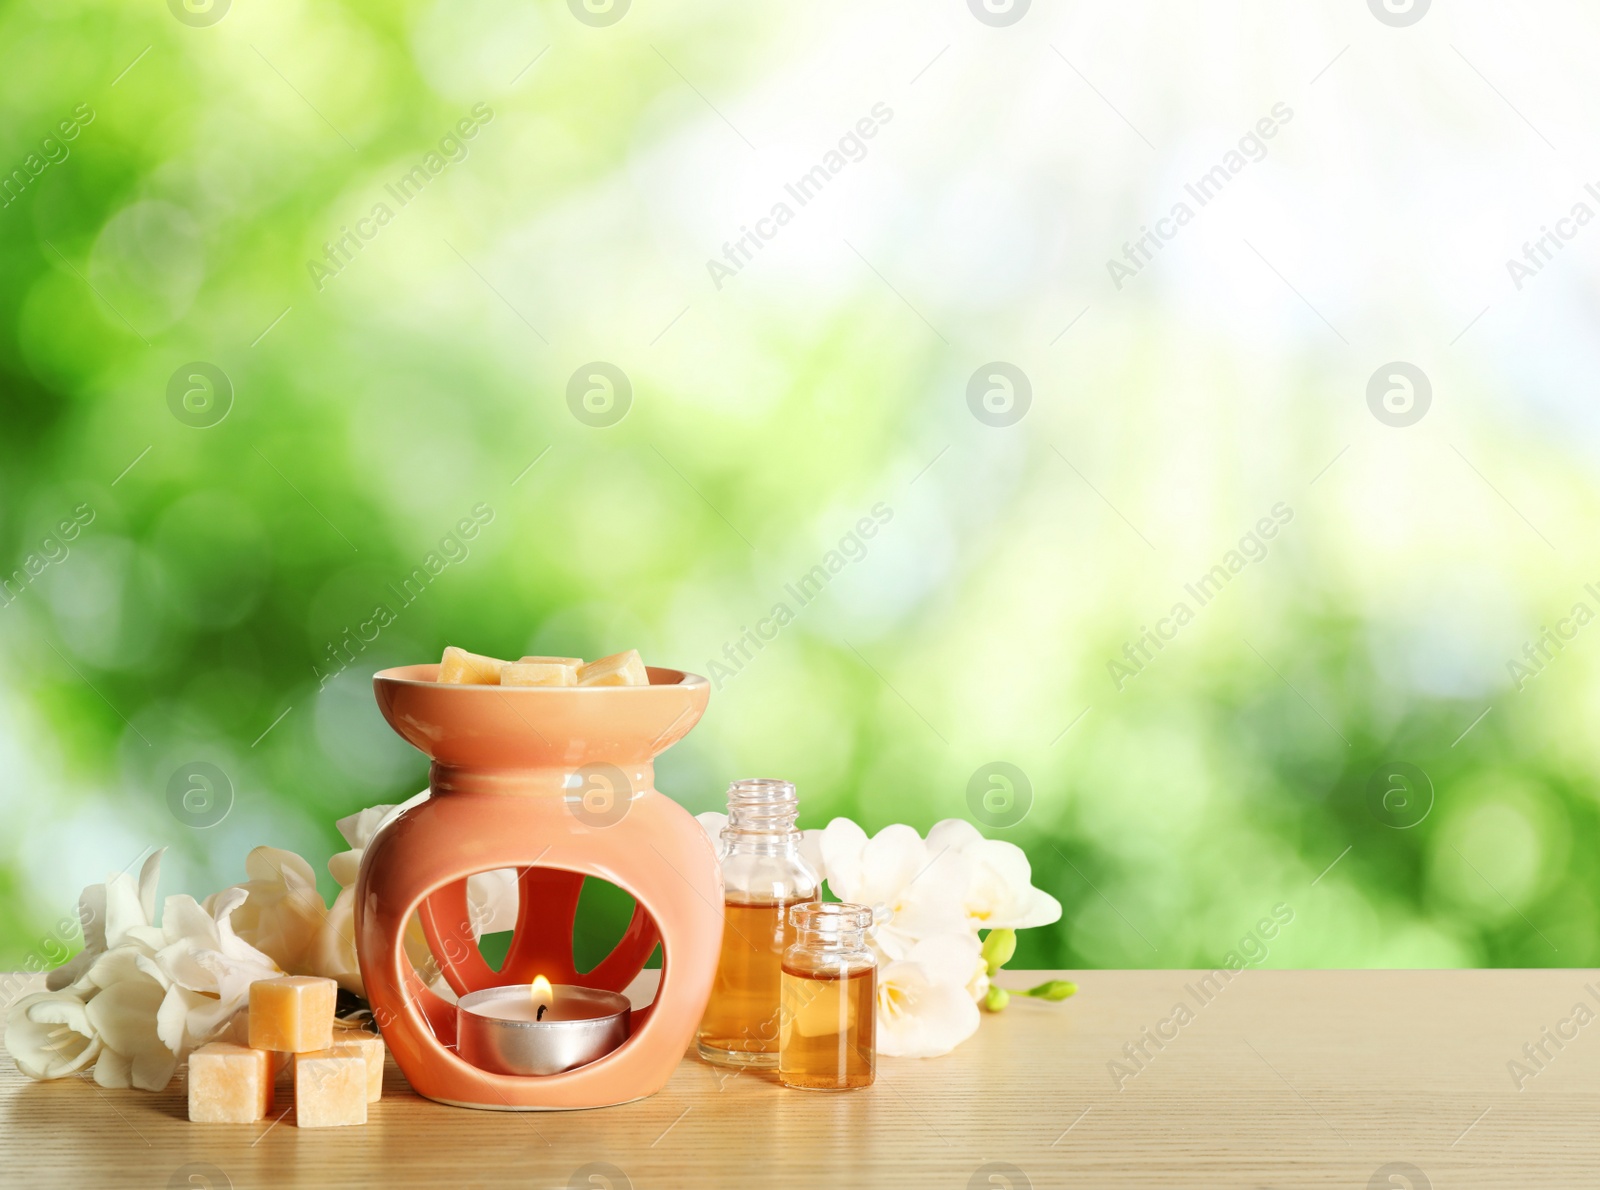 Image of Composition with aroma lamp on wooden table outdoors, space for text. Bokeh effect